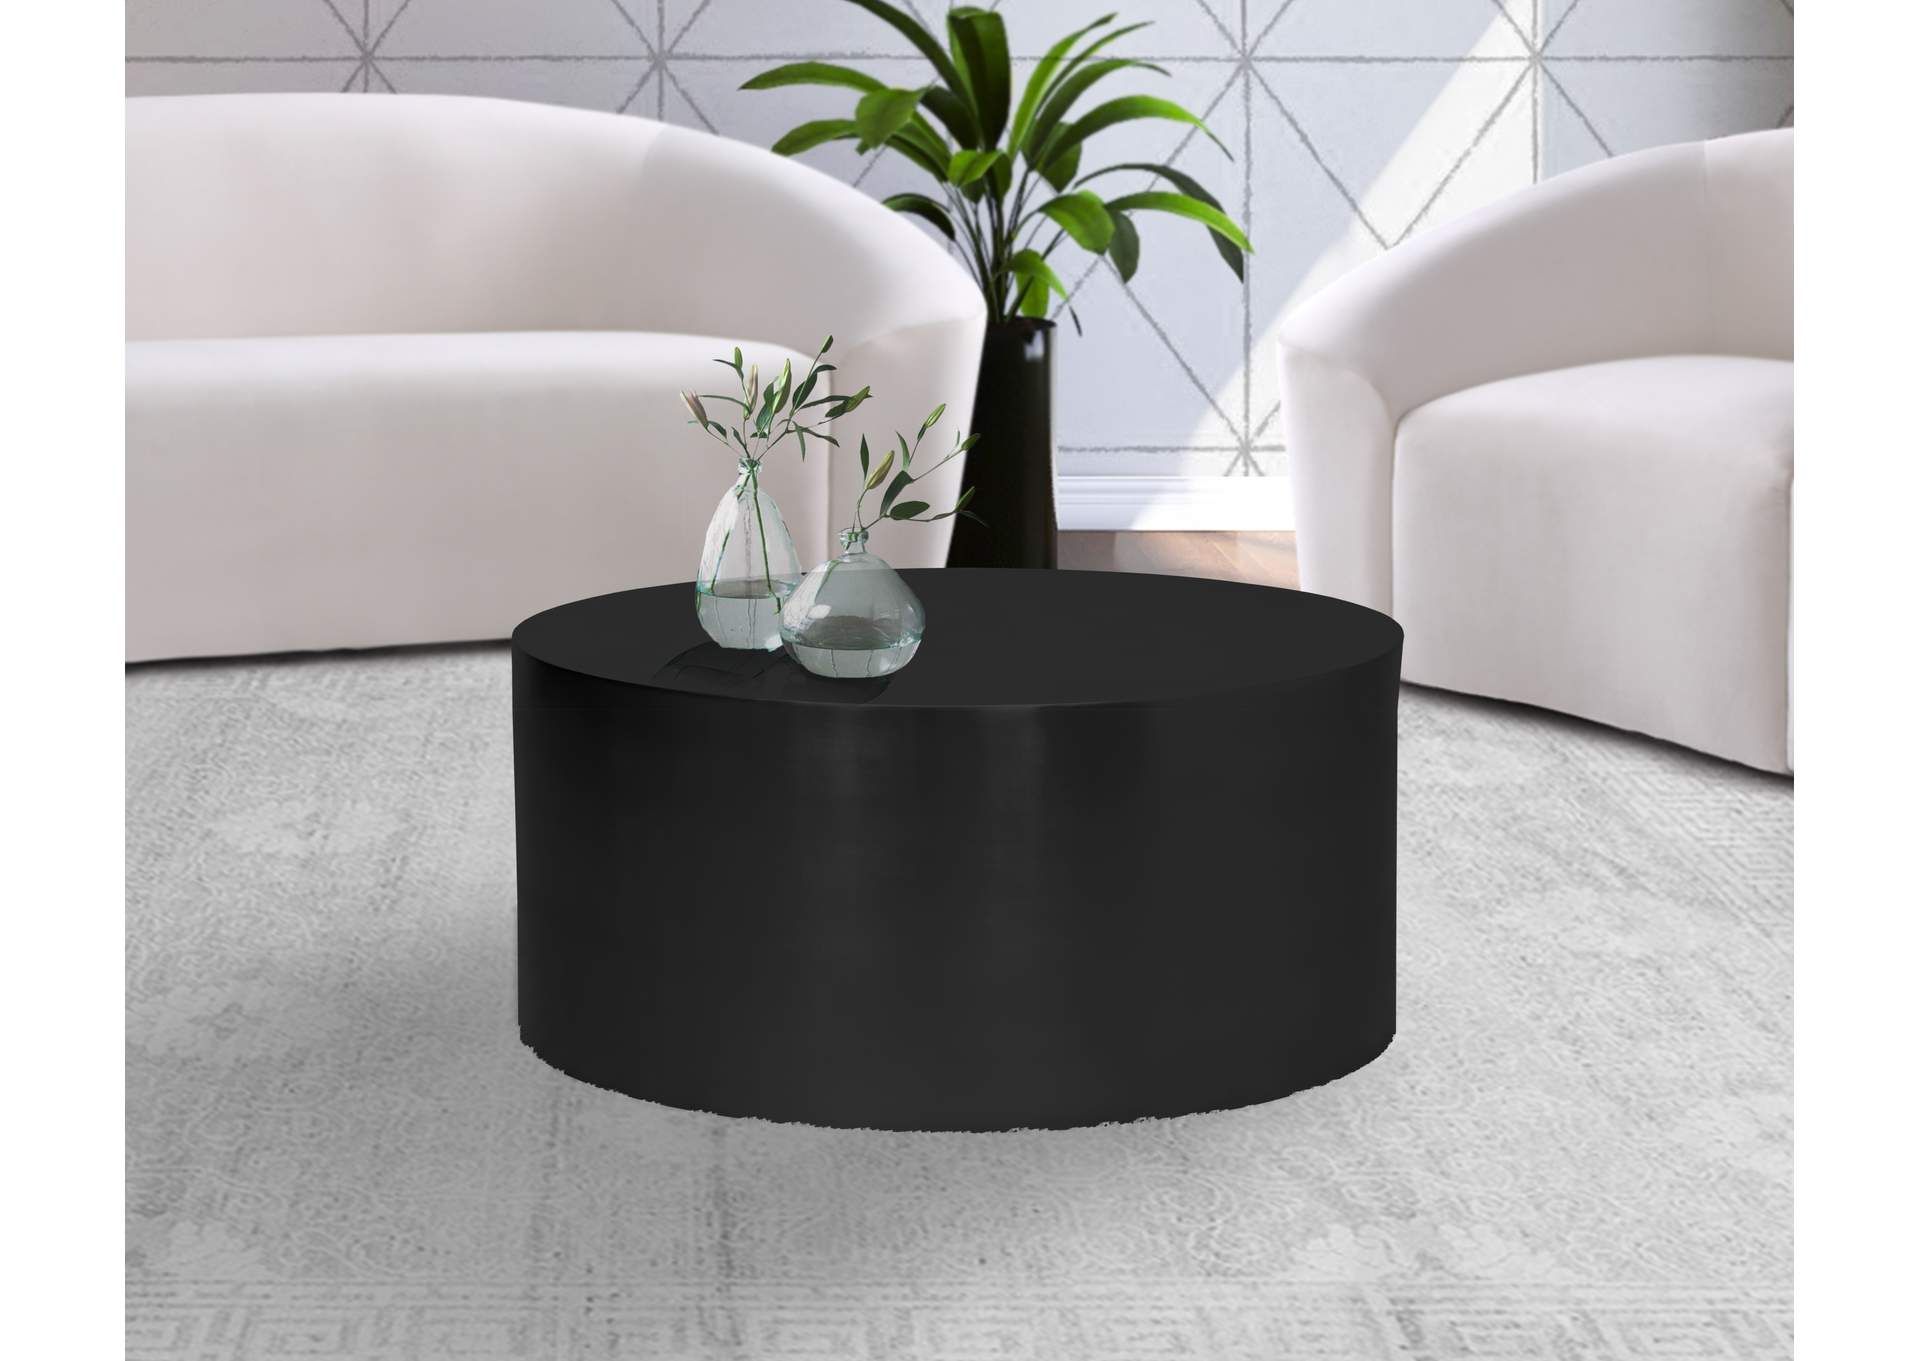 Cylinder Matte Black Coffee Table Harlem Furniture Within Current Matte Coffee Tables (View 12 of 20)